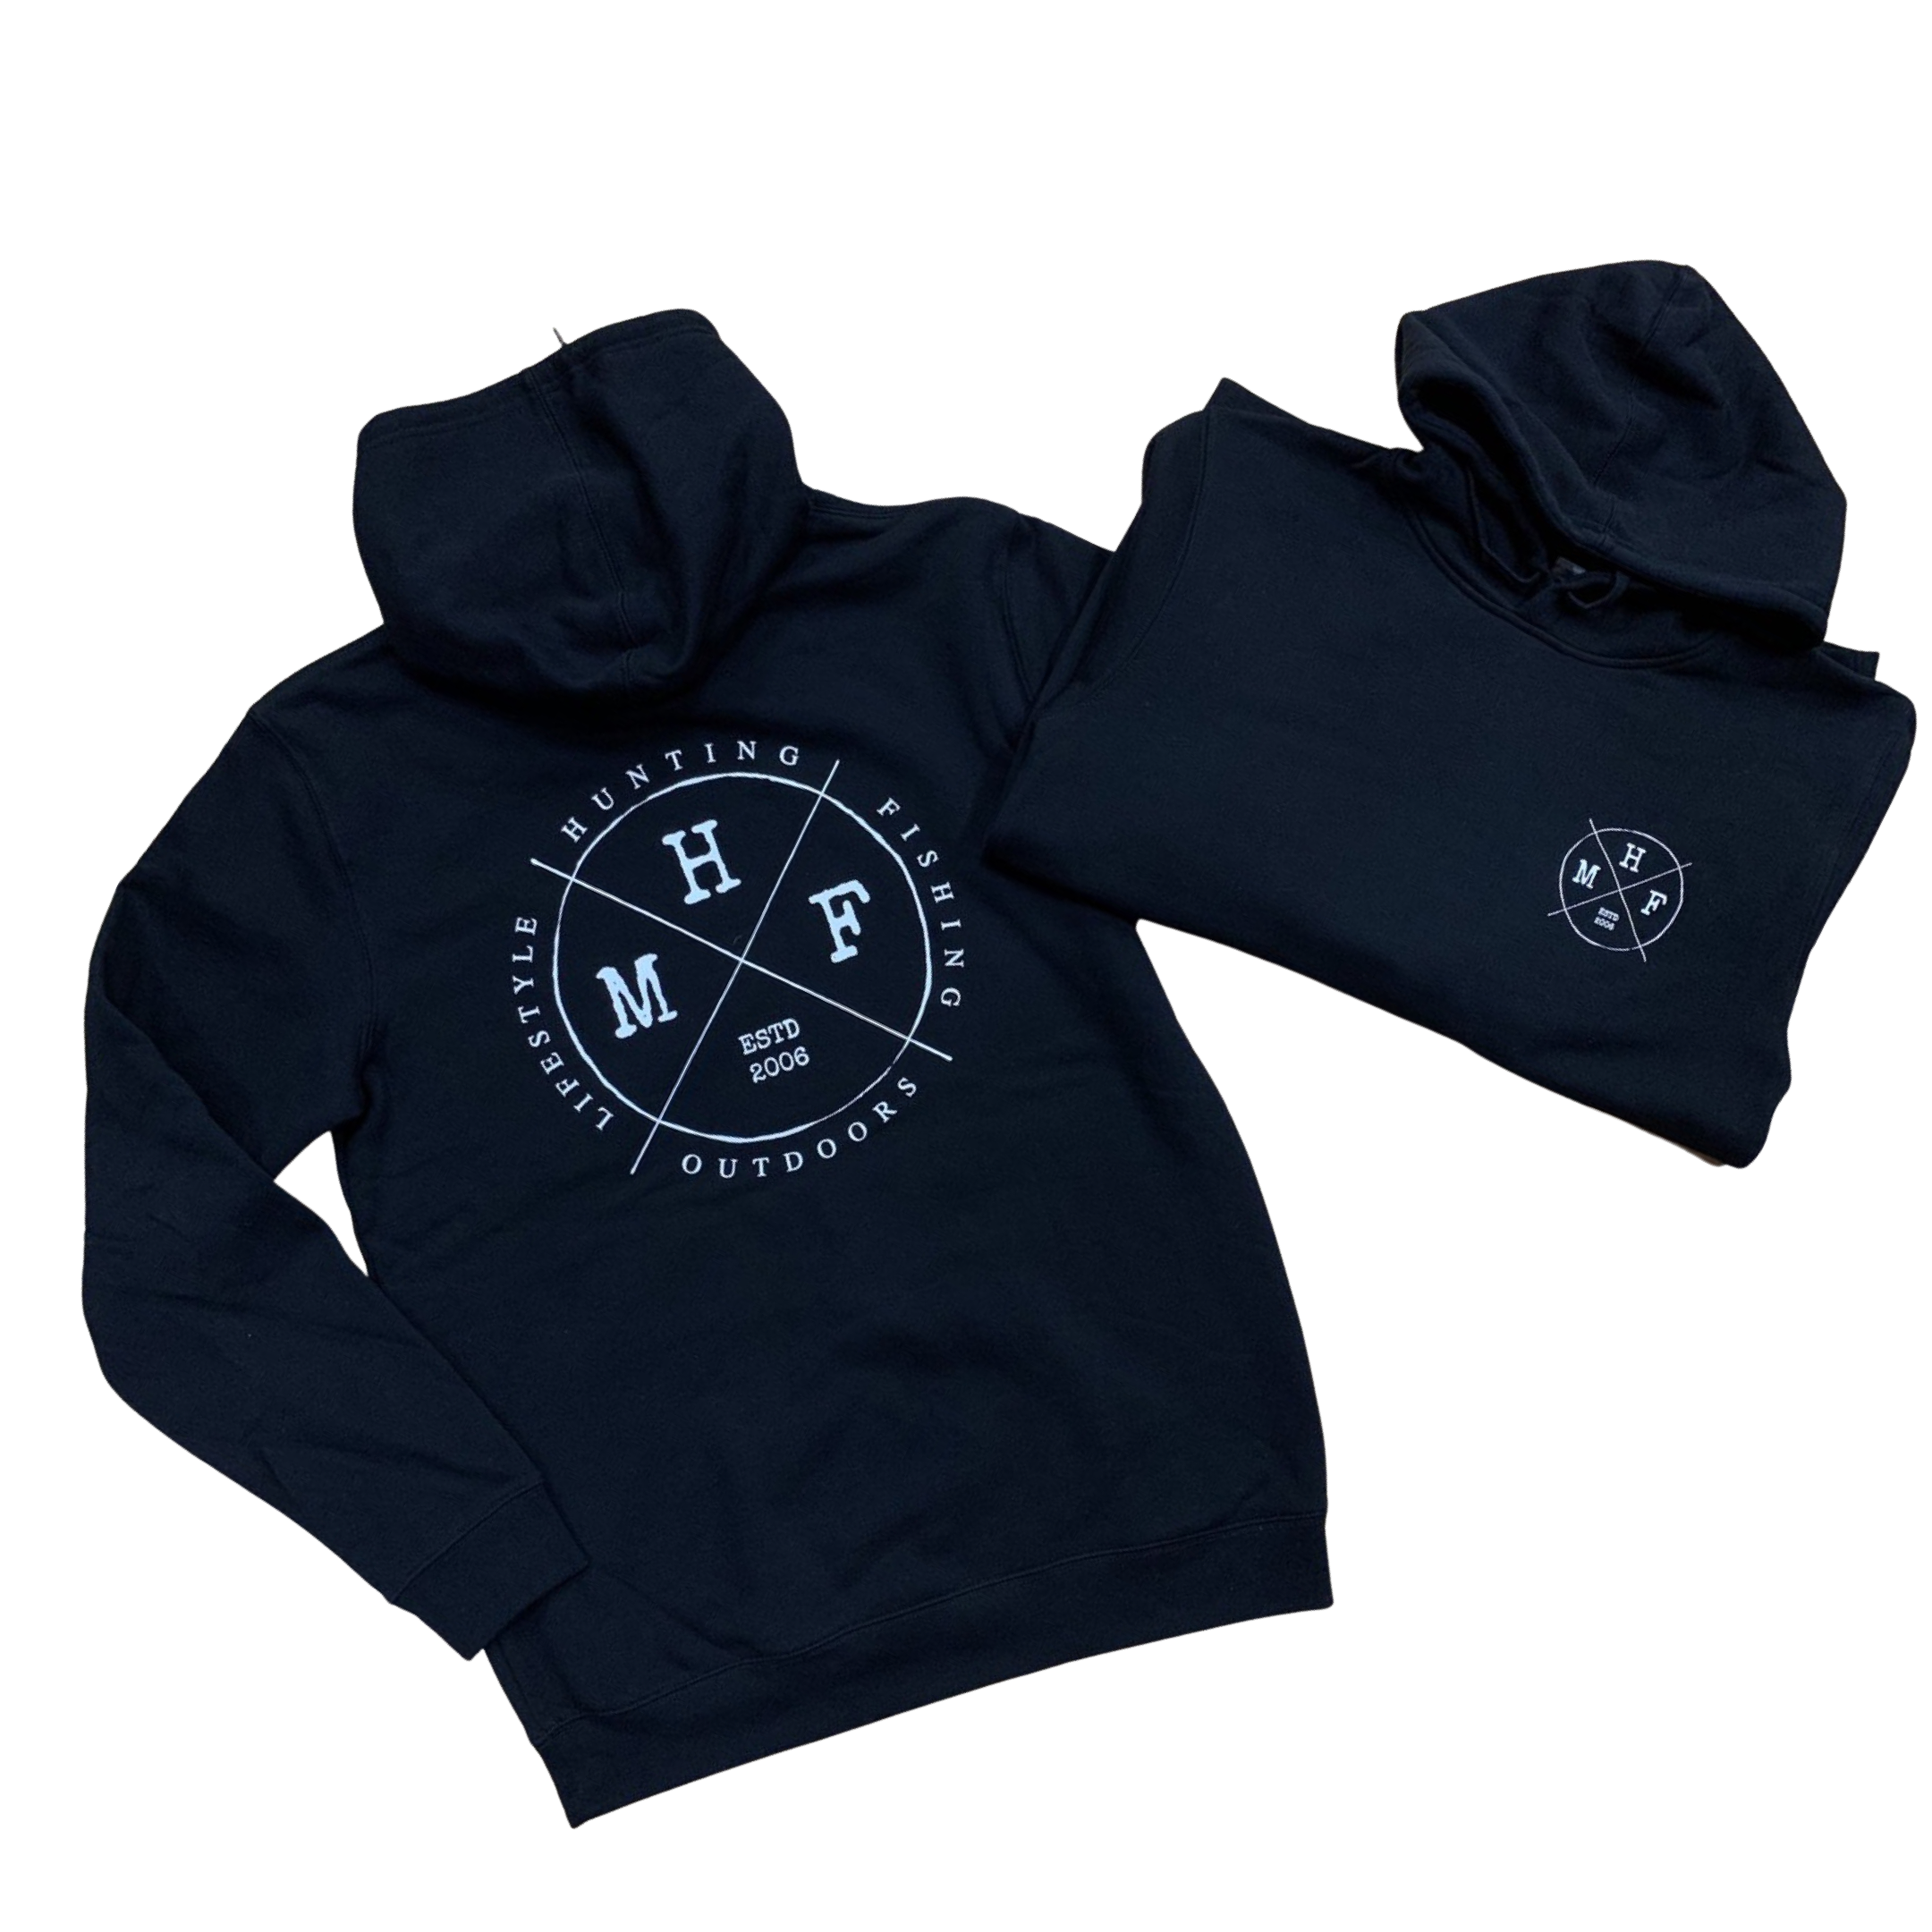 MHF Lifestyle Hoodie - Black -  - Mansfield Hunting & Fishing - Products to prepare for Corona Virus